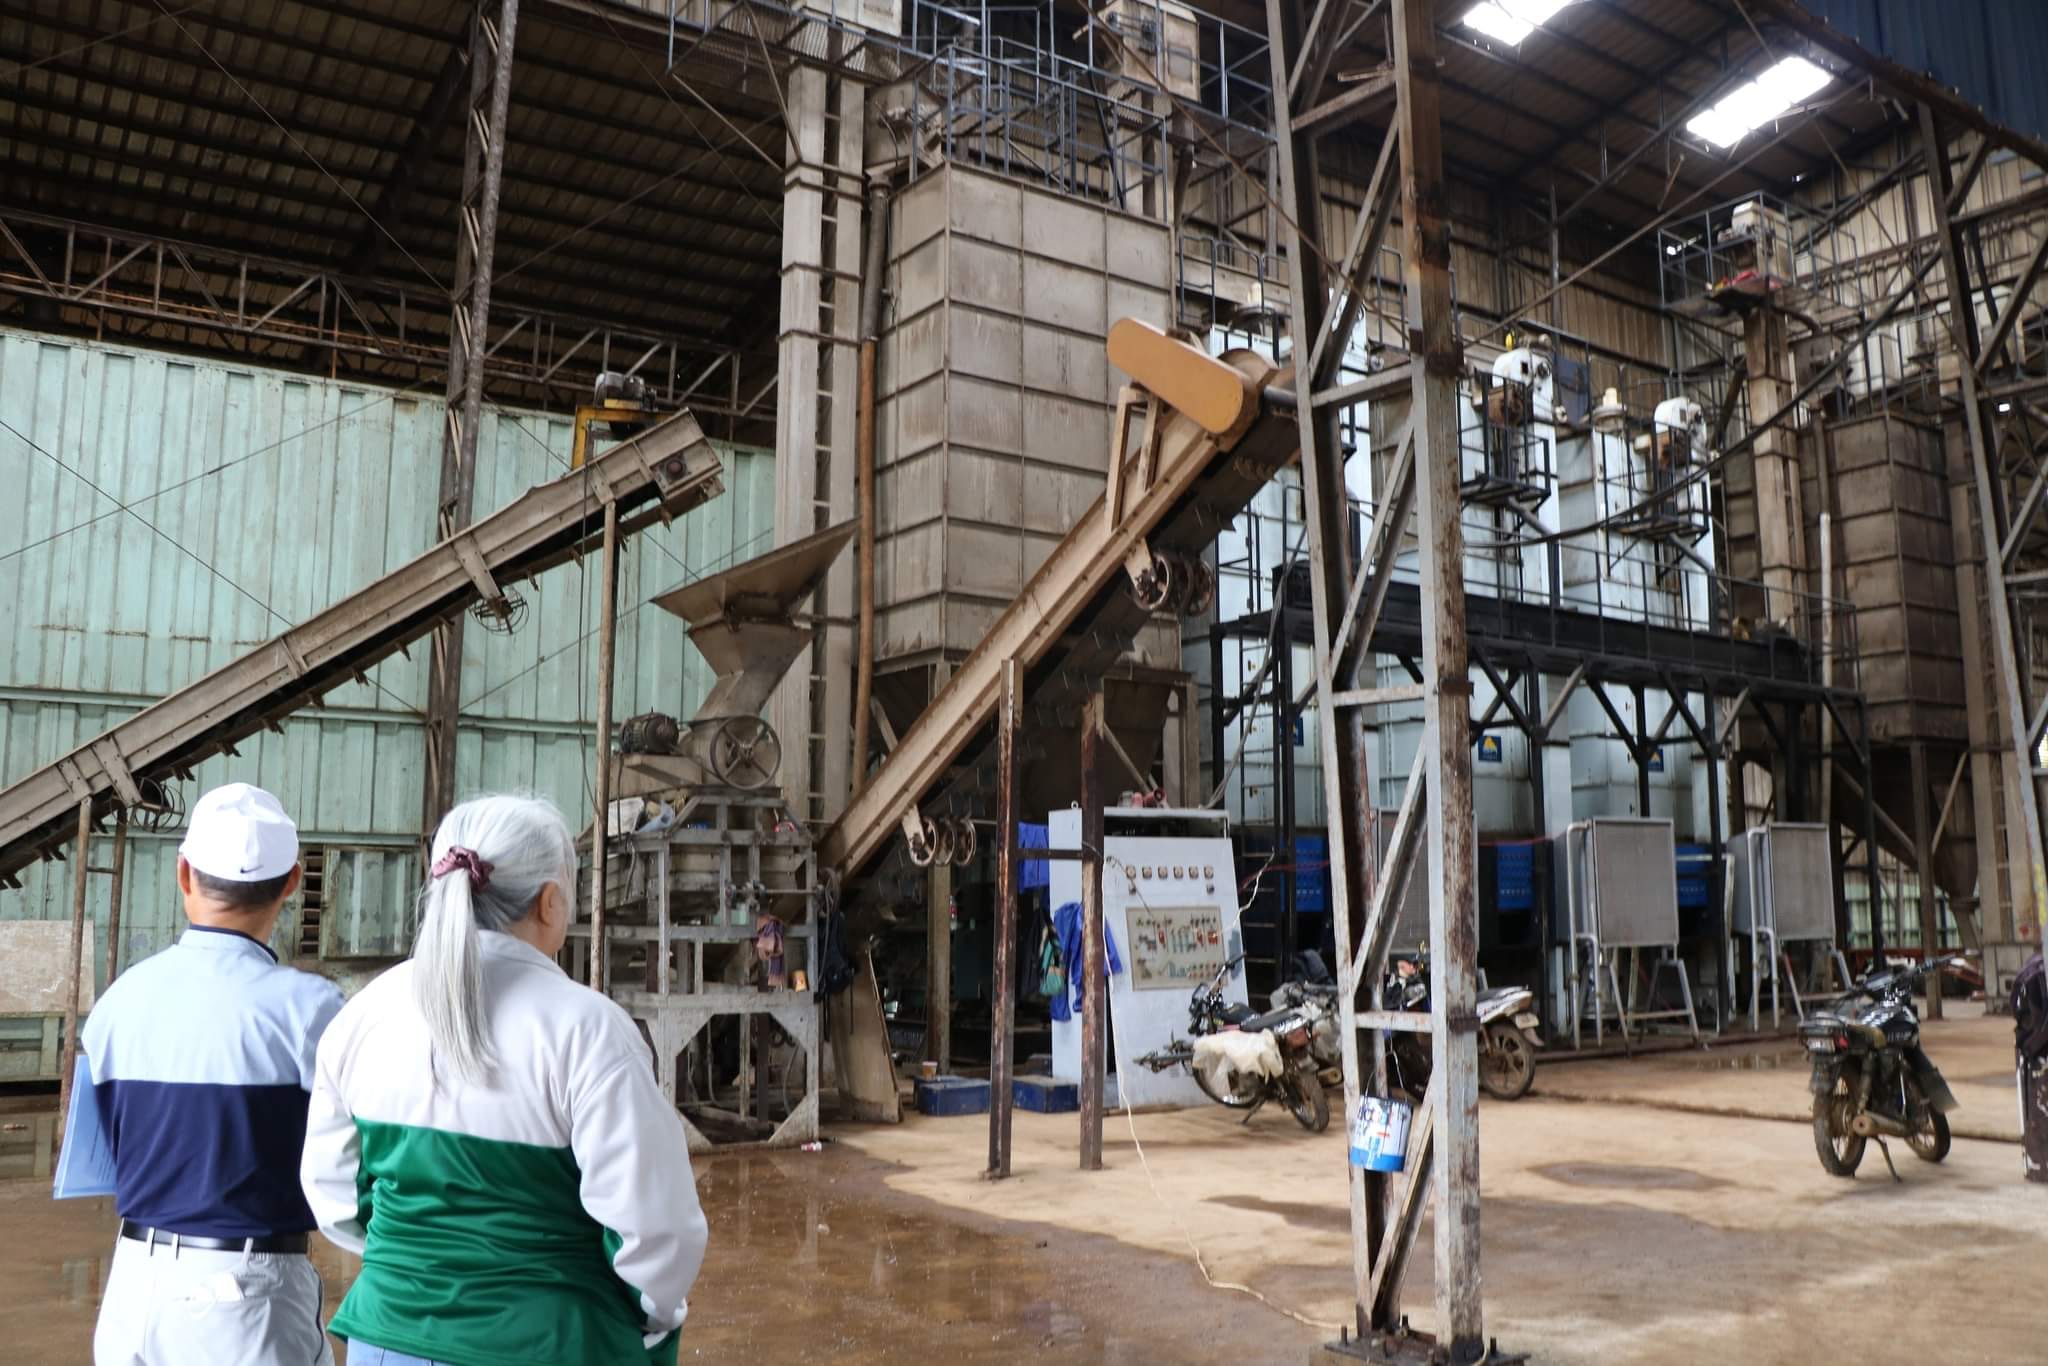 DA-10 conducts final inspection of Corn Processing Center in Claveria town